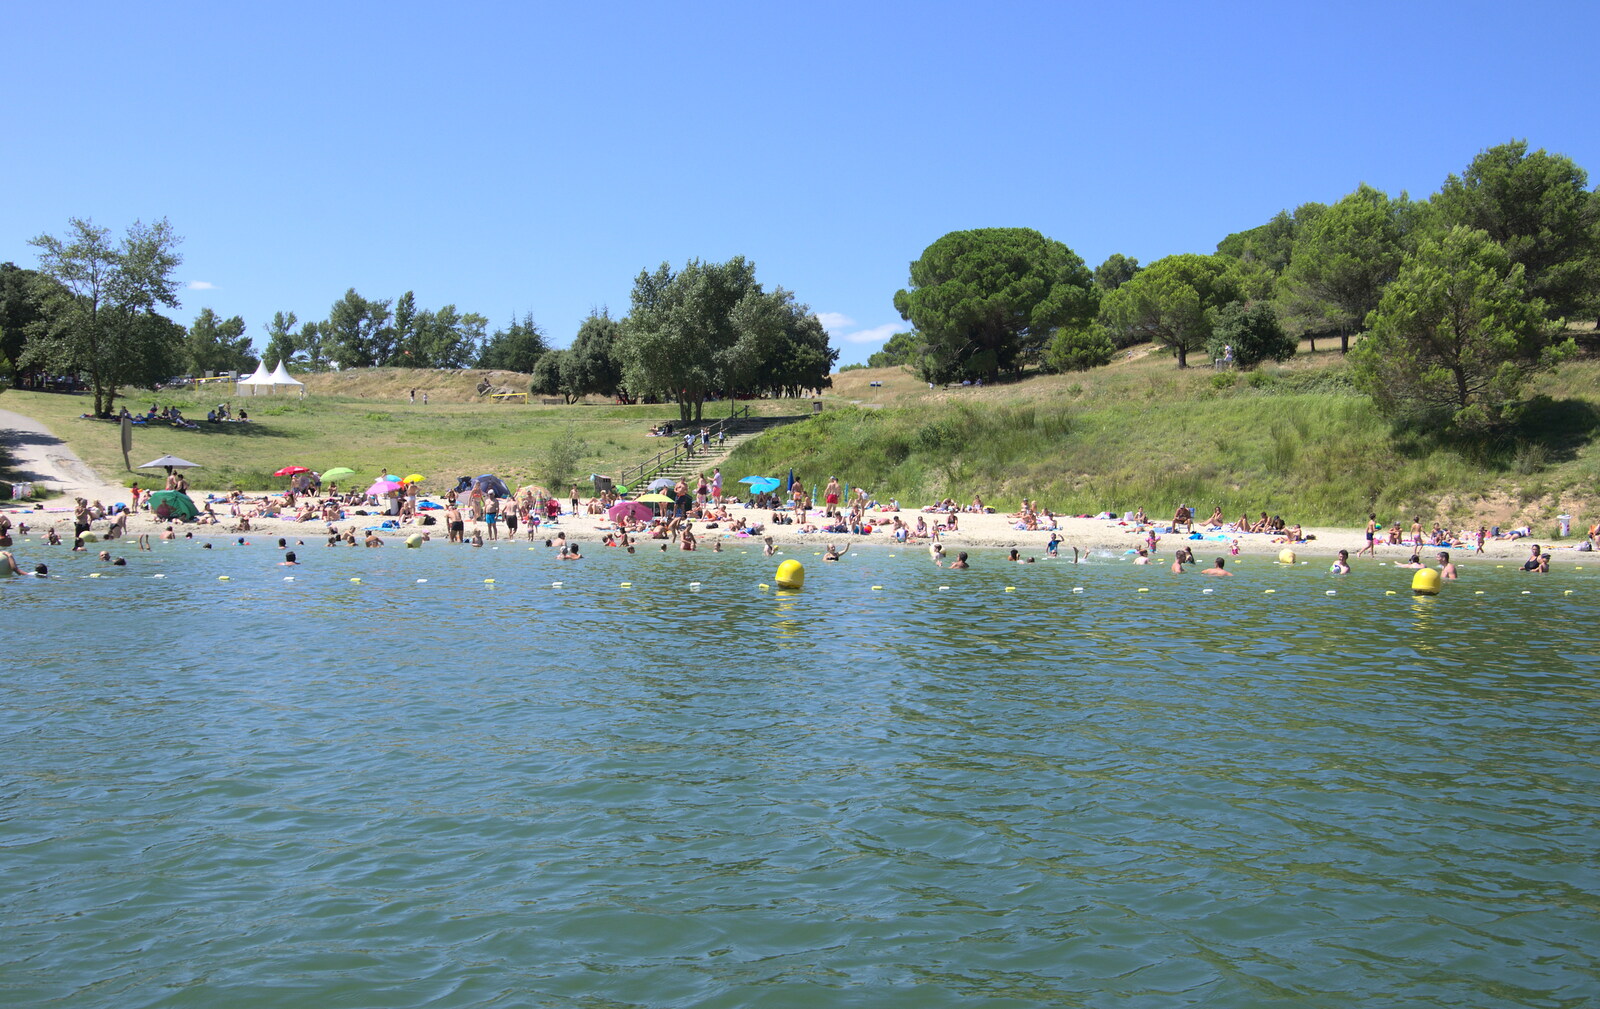 The beach is now heaving, as seen from the pedalo from Abbaye Sainte-Marie de Lagrasse and The Lac de la Cavayère, Aude, France - 10th August